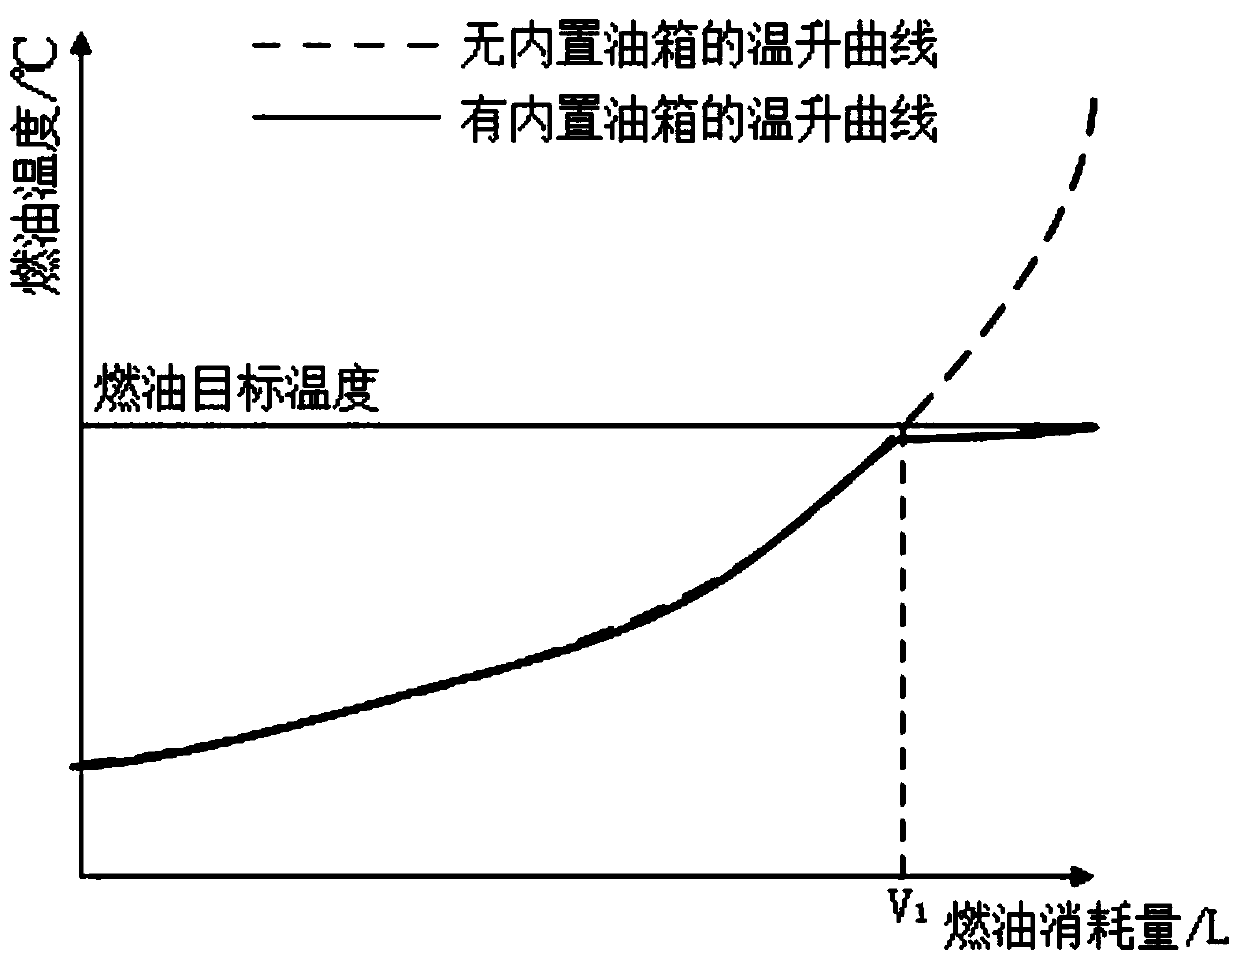 Oil transportation heat management system design method for controlling temperature rise of fuel oil of high-speed aircraft